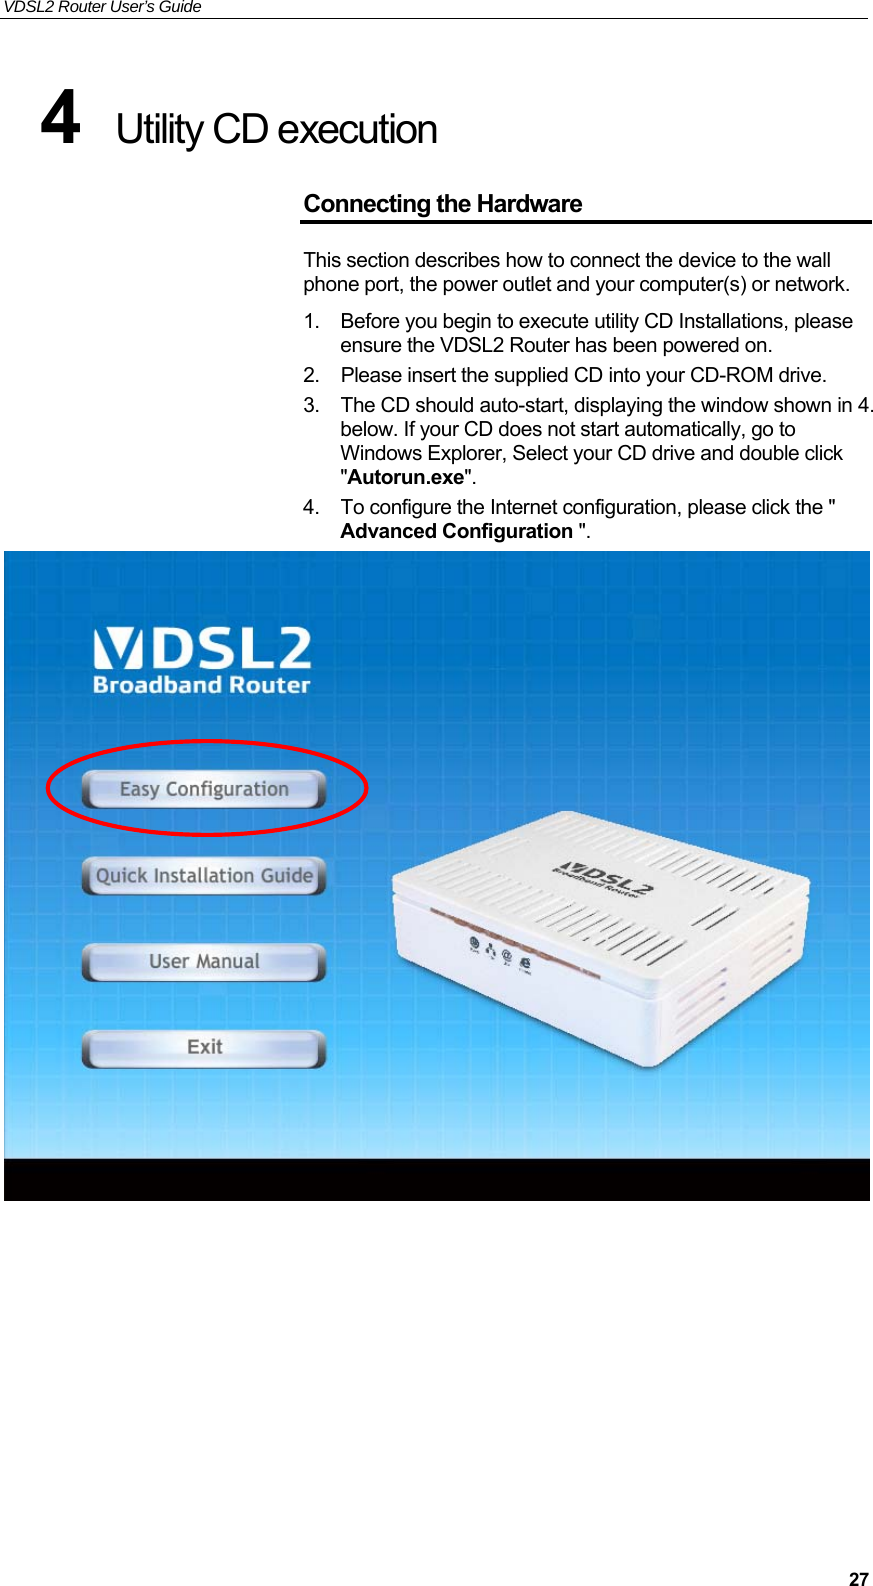 VDSL2 Router User’s Guide     274  Utility CD execution  Connecting the Hardware This section describes how to connect the device to the wall phone port, the power outlet and your computer(s) or network. 1.  Before you begin to execute utility CD Installations, please ensure the VDSL2 Router has been powered on. 2.  Please insert the supplied CD into your CD-ROM drive. 3.  The CD should auto-start, displaying the window shown in 4. below. If your CD does not start automatically, go to Windows Explorer, Select your CD drive and double click &quot;Autorun.exe&quot;. 4.  To configure the Internet configuration, please click the &quot; Advanced Configuration &quot;.          